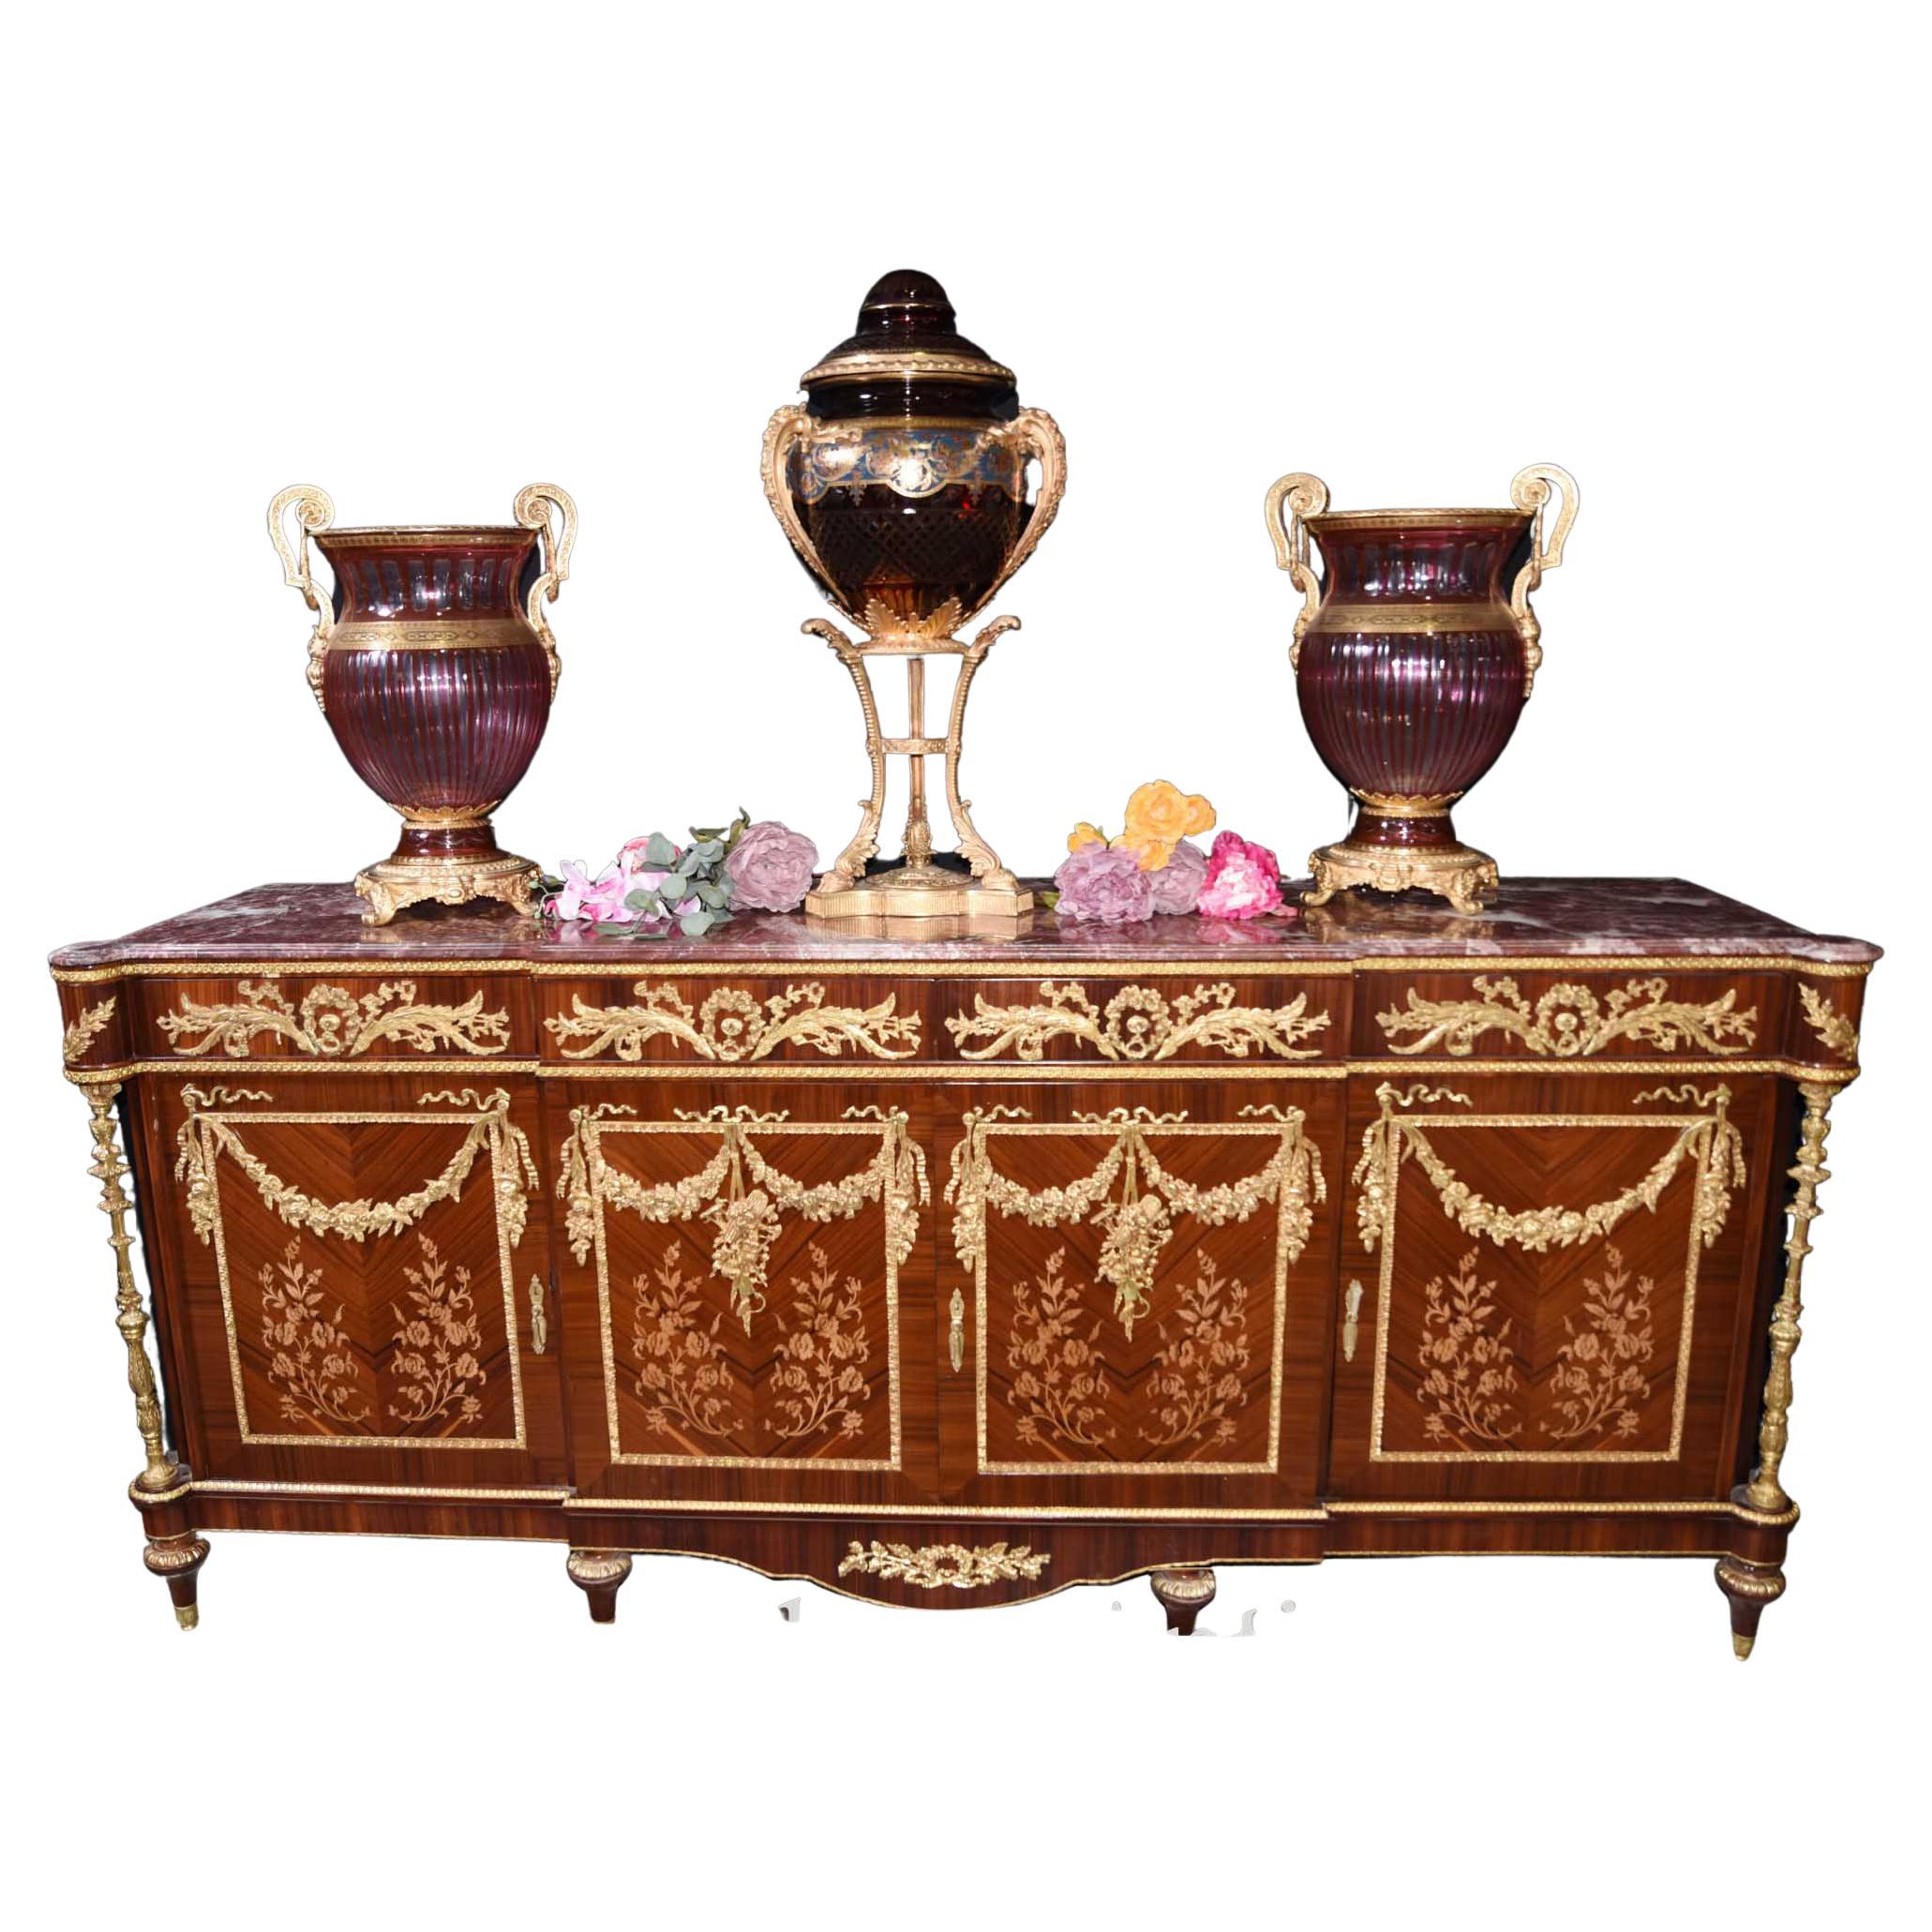 XL French Empire Sideboard